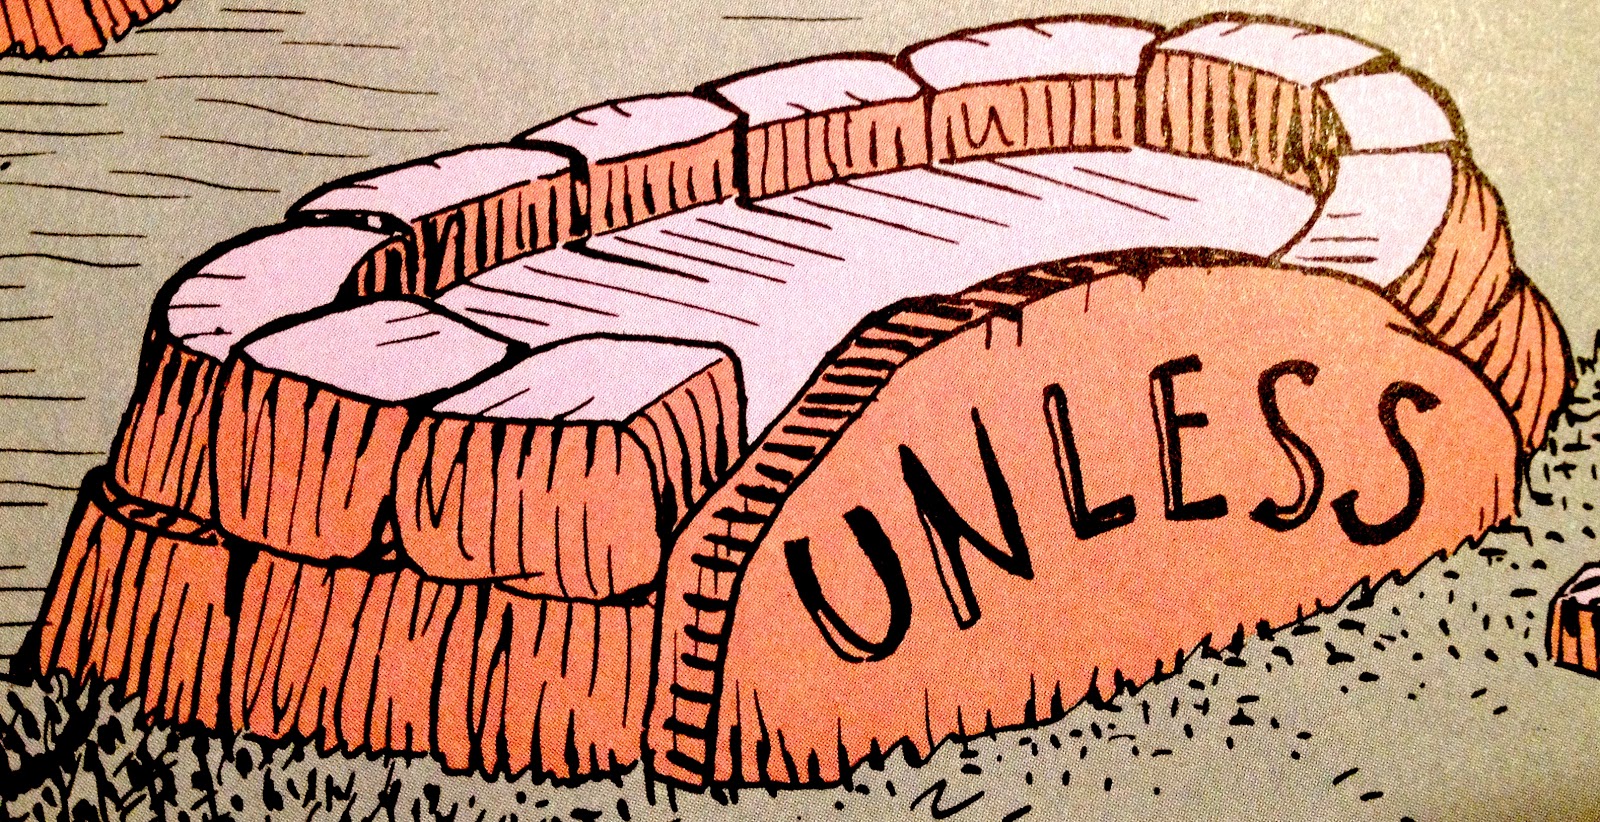 A circle of stones reads "UNLESS", from Dr. Seuss's "The Lorax"